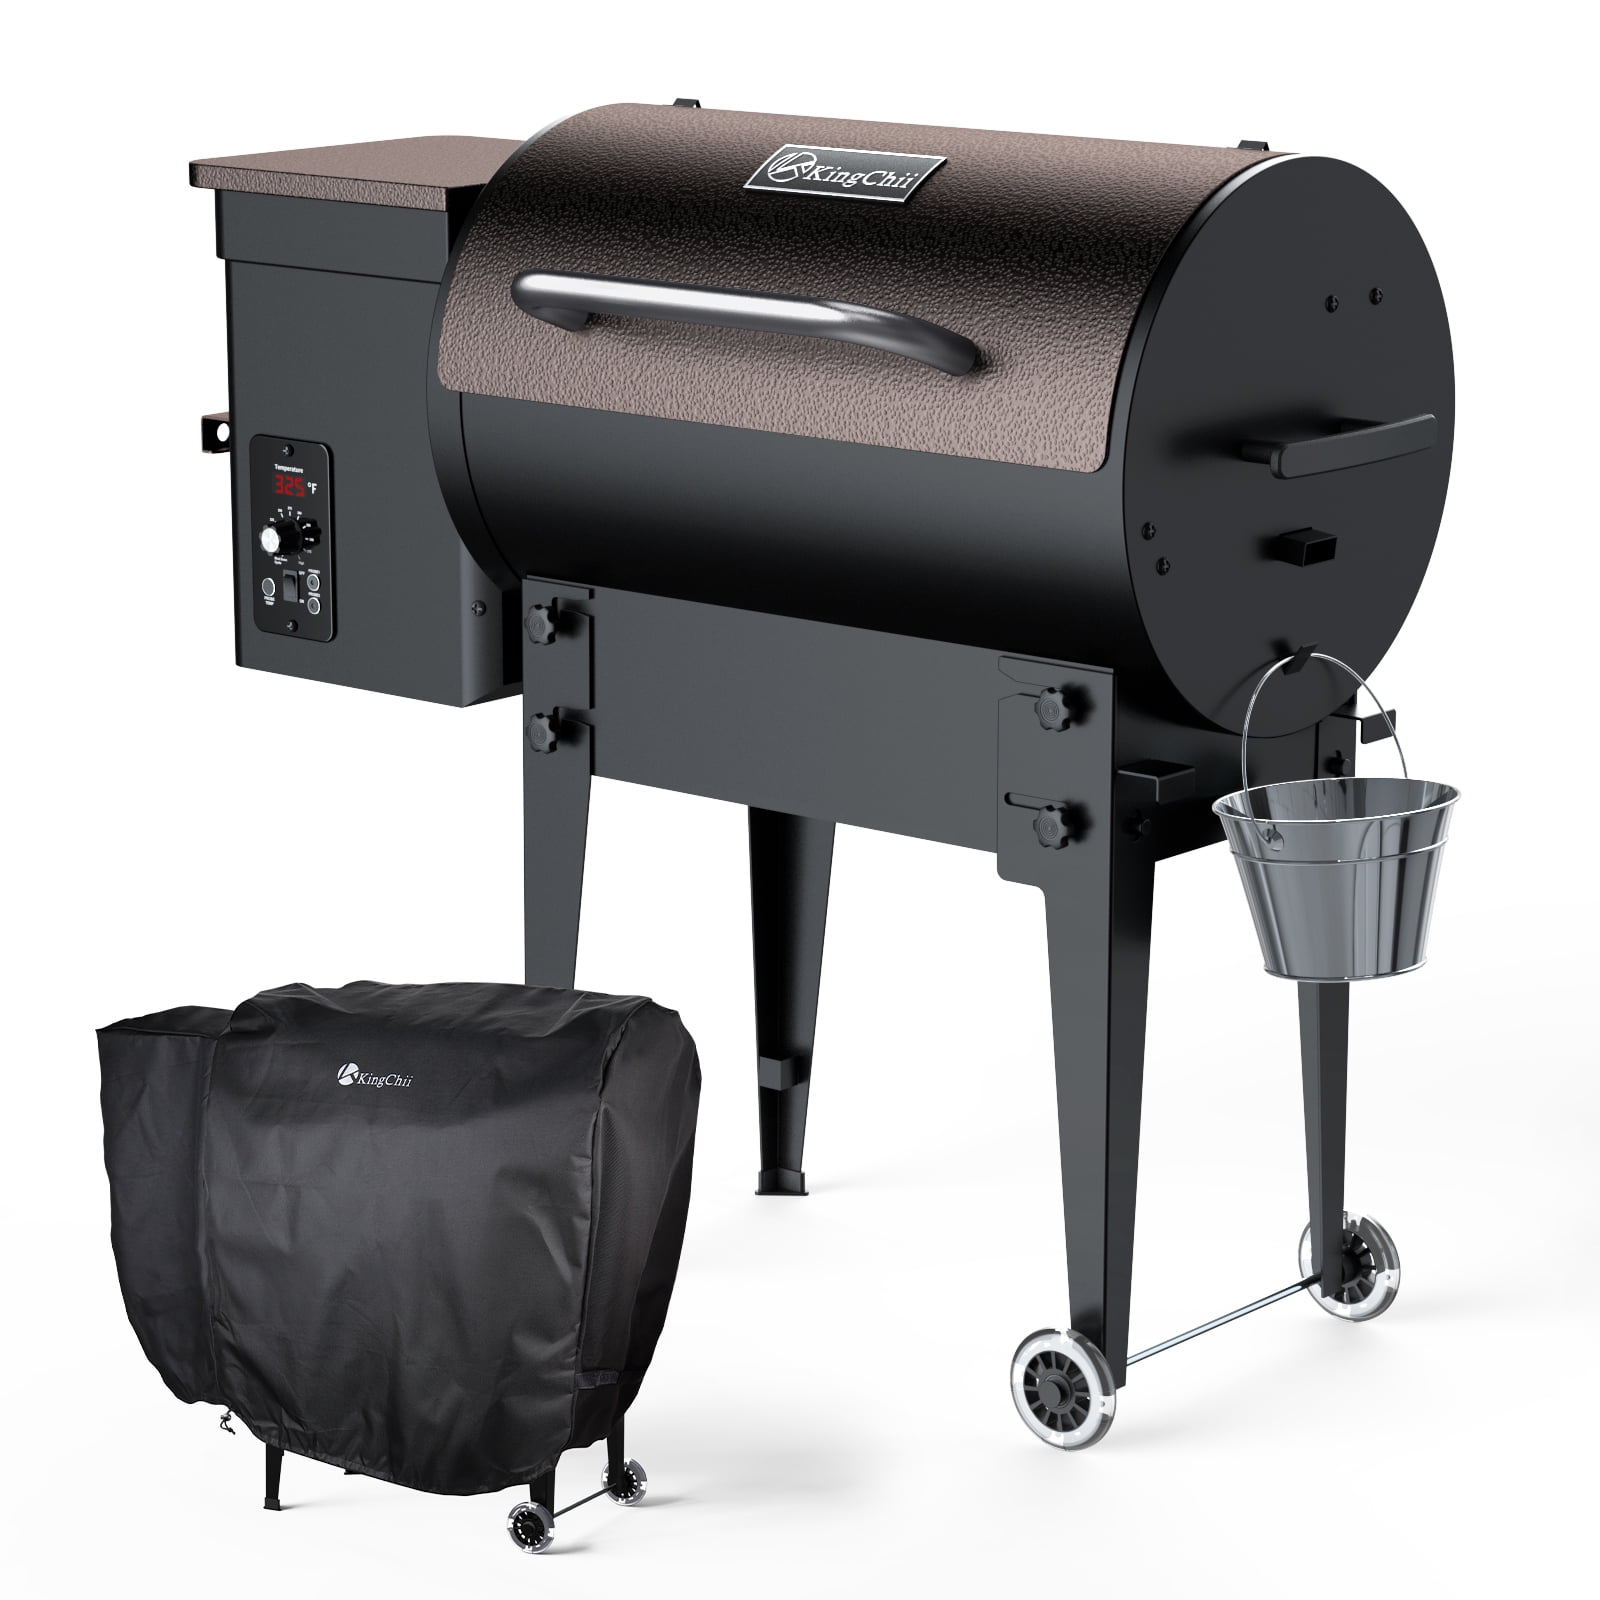 KingChii 456 sq. in Wood Pellet Smoker & Grill BBQ with Auto Temperature Controls, Folding Legs for Outdoor Patio RV (Rain Cover Included), Bronze